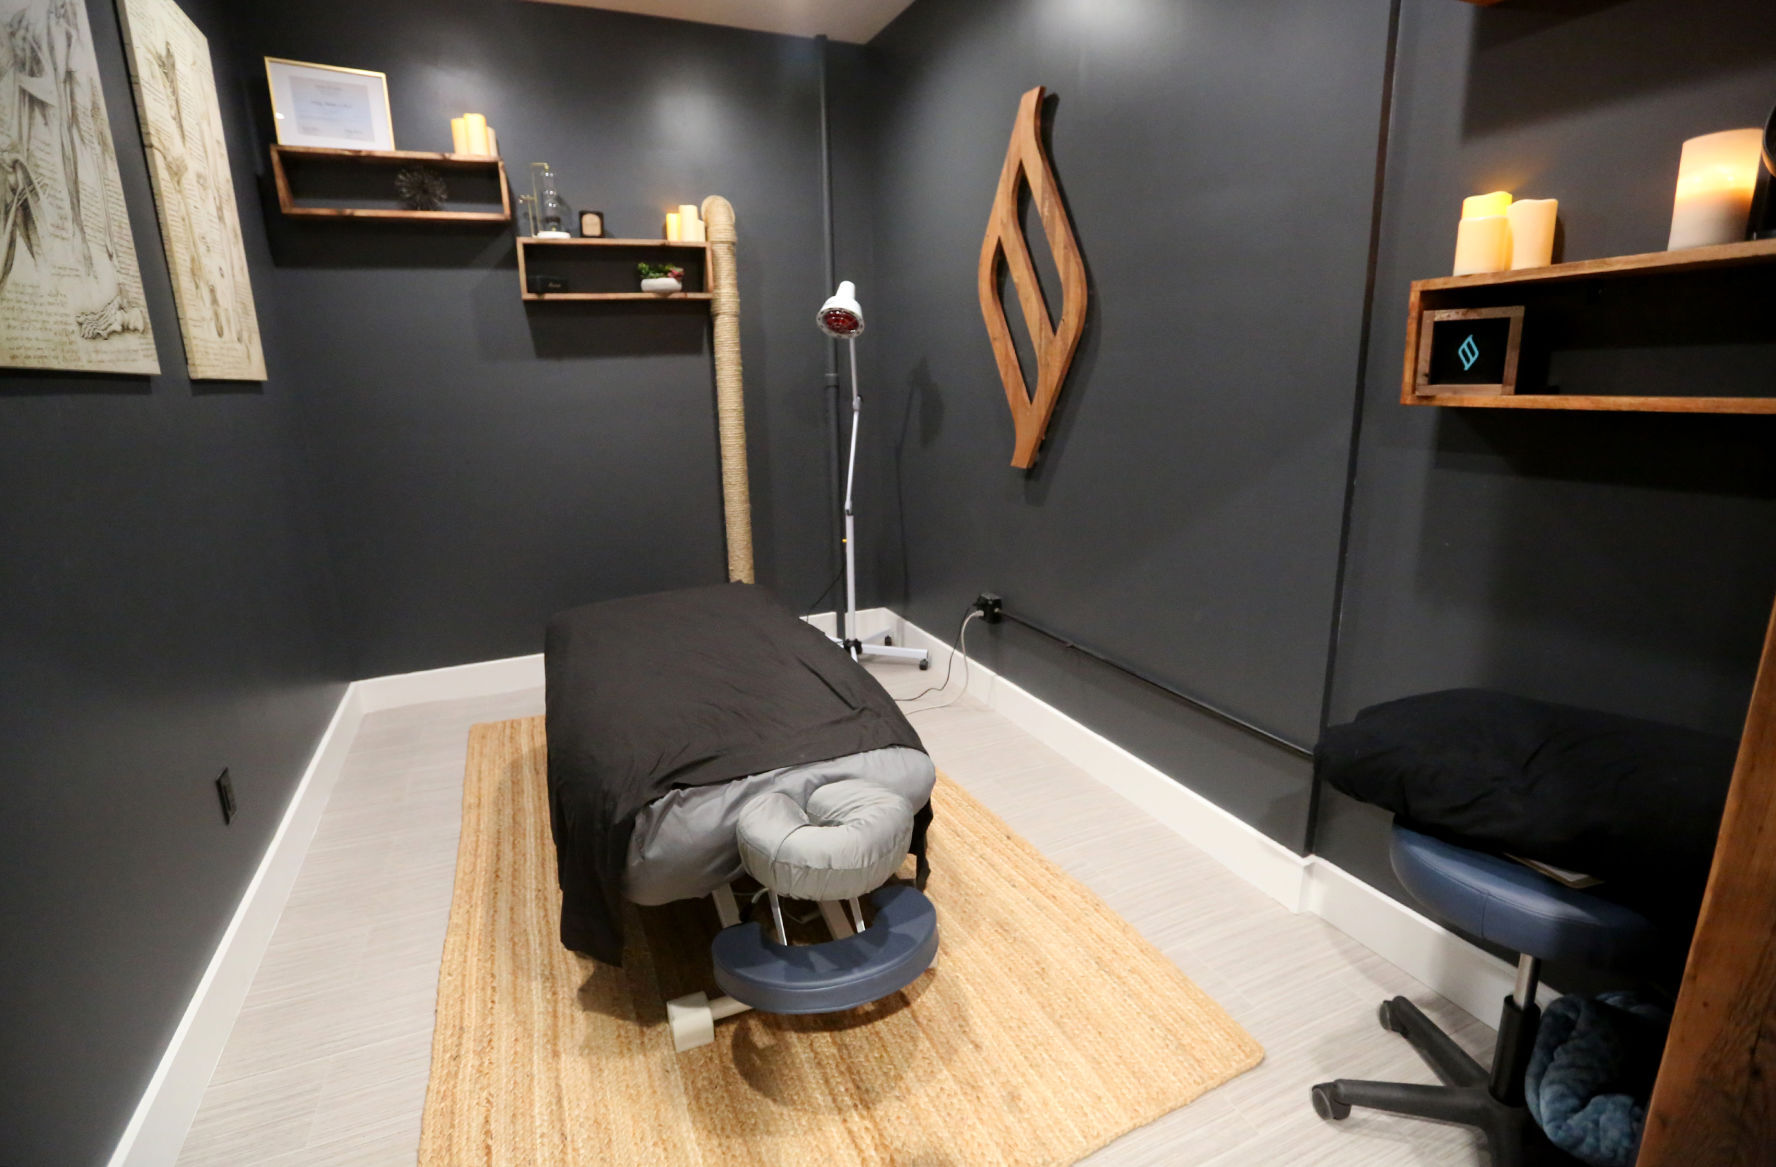 A therapy room at Be One Wellness in Dubuque. PHOTO CREDIT: JESSICA REILLY